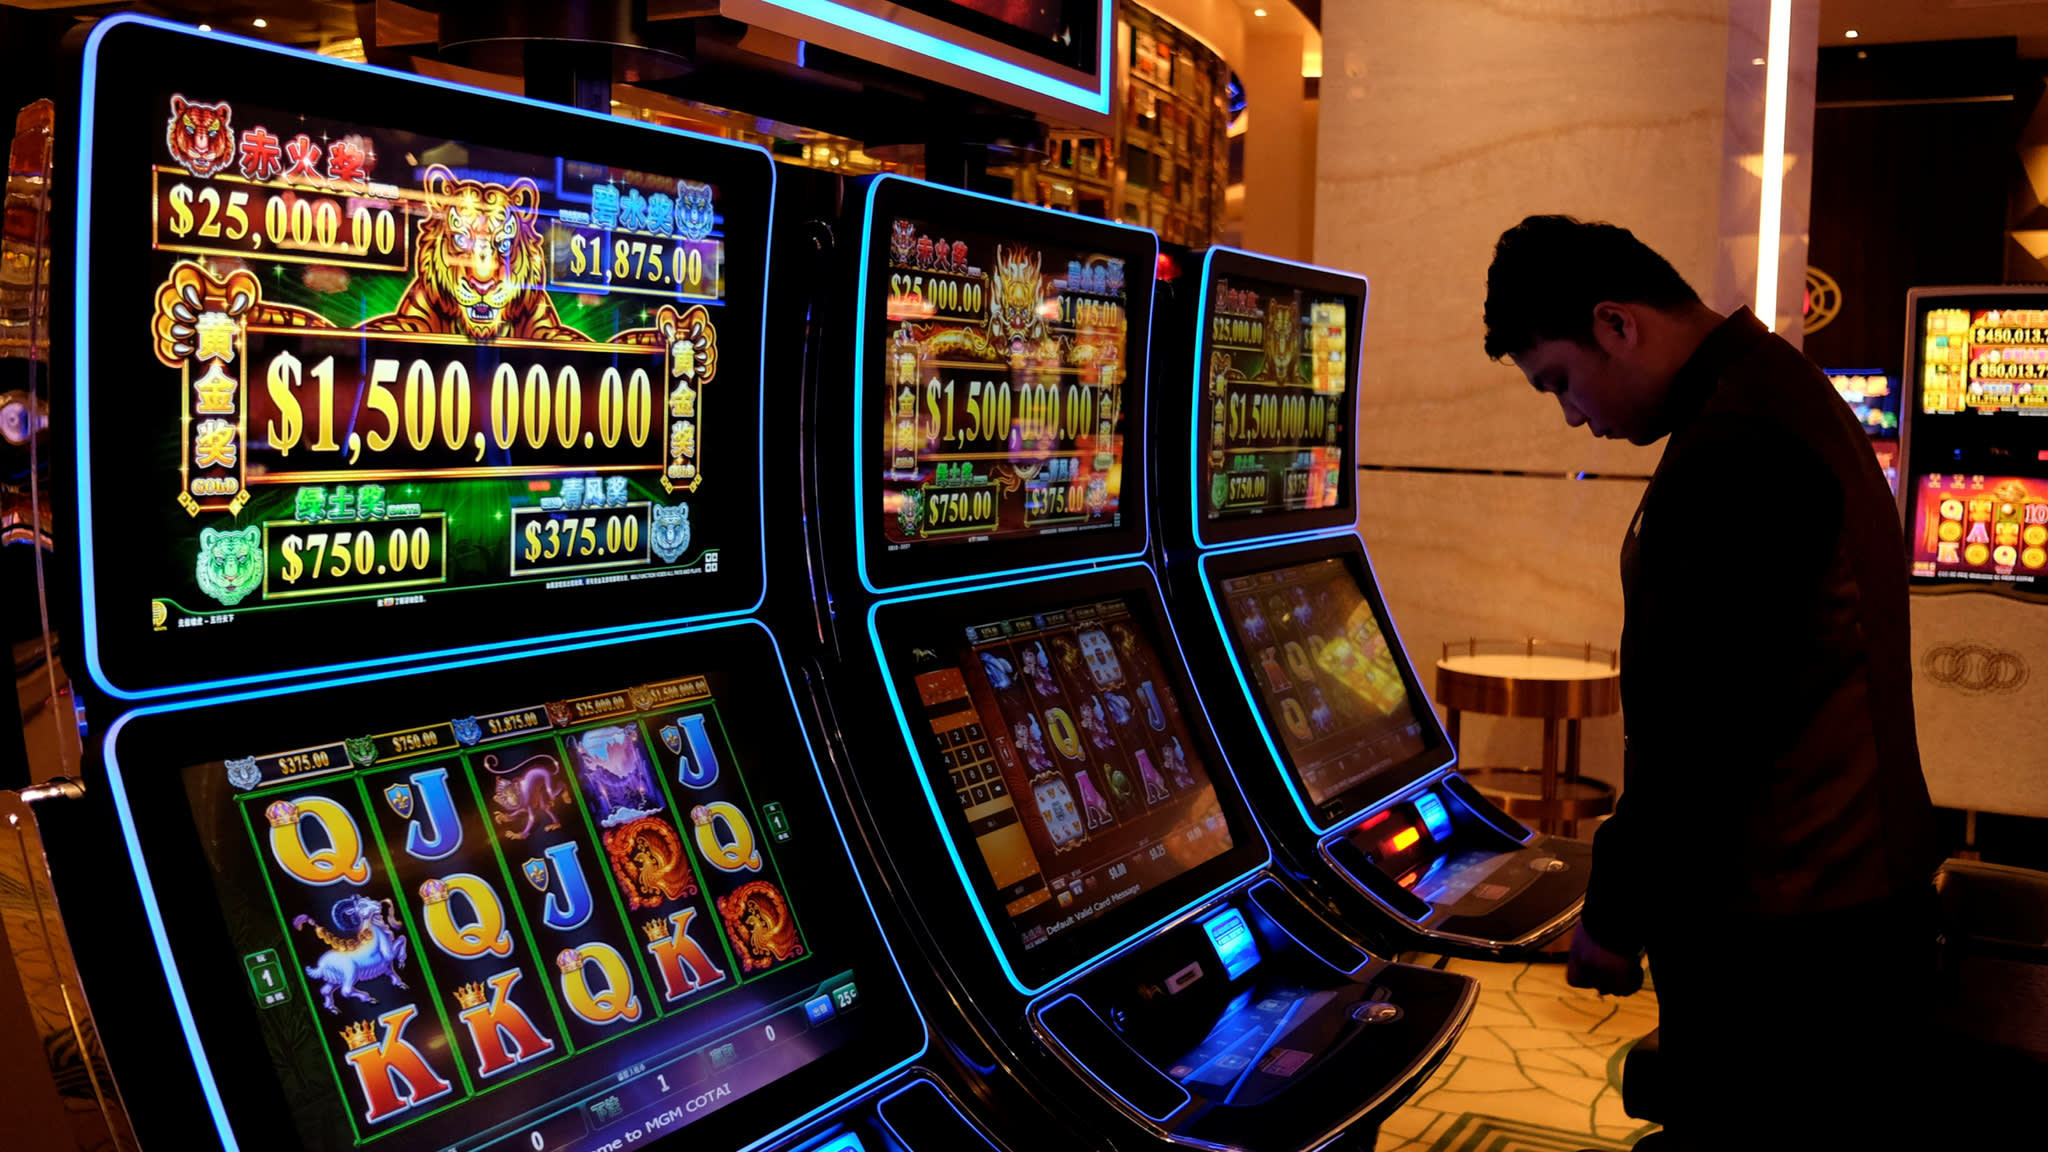 Indiana Hopes to Reopen Casinos by Mid-June